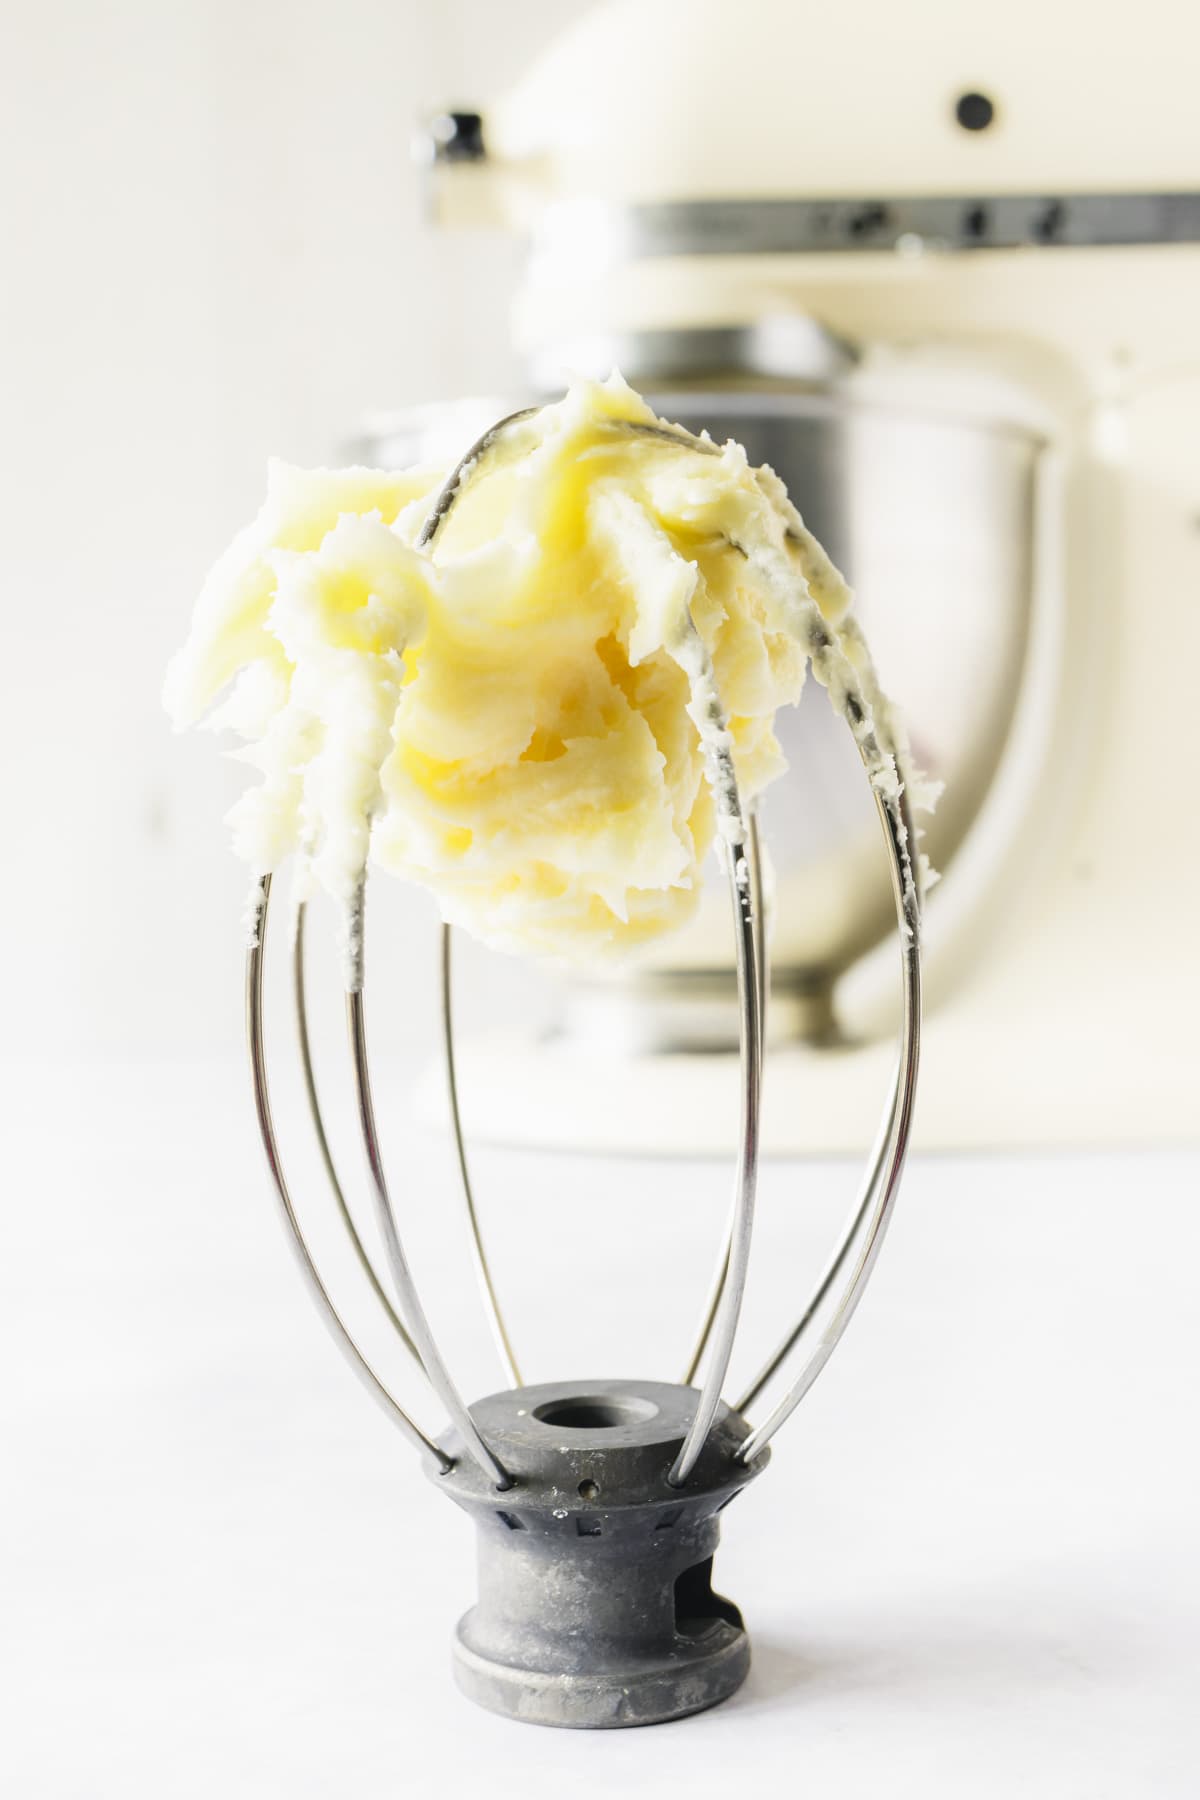 Cream cheese buttercream on a stand mixer whisk attachment